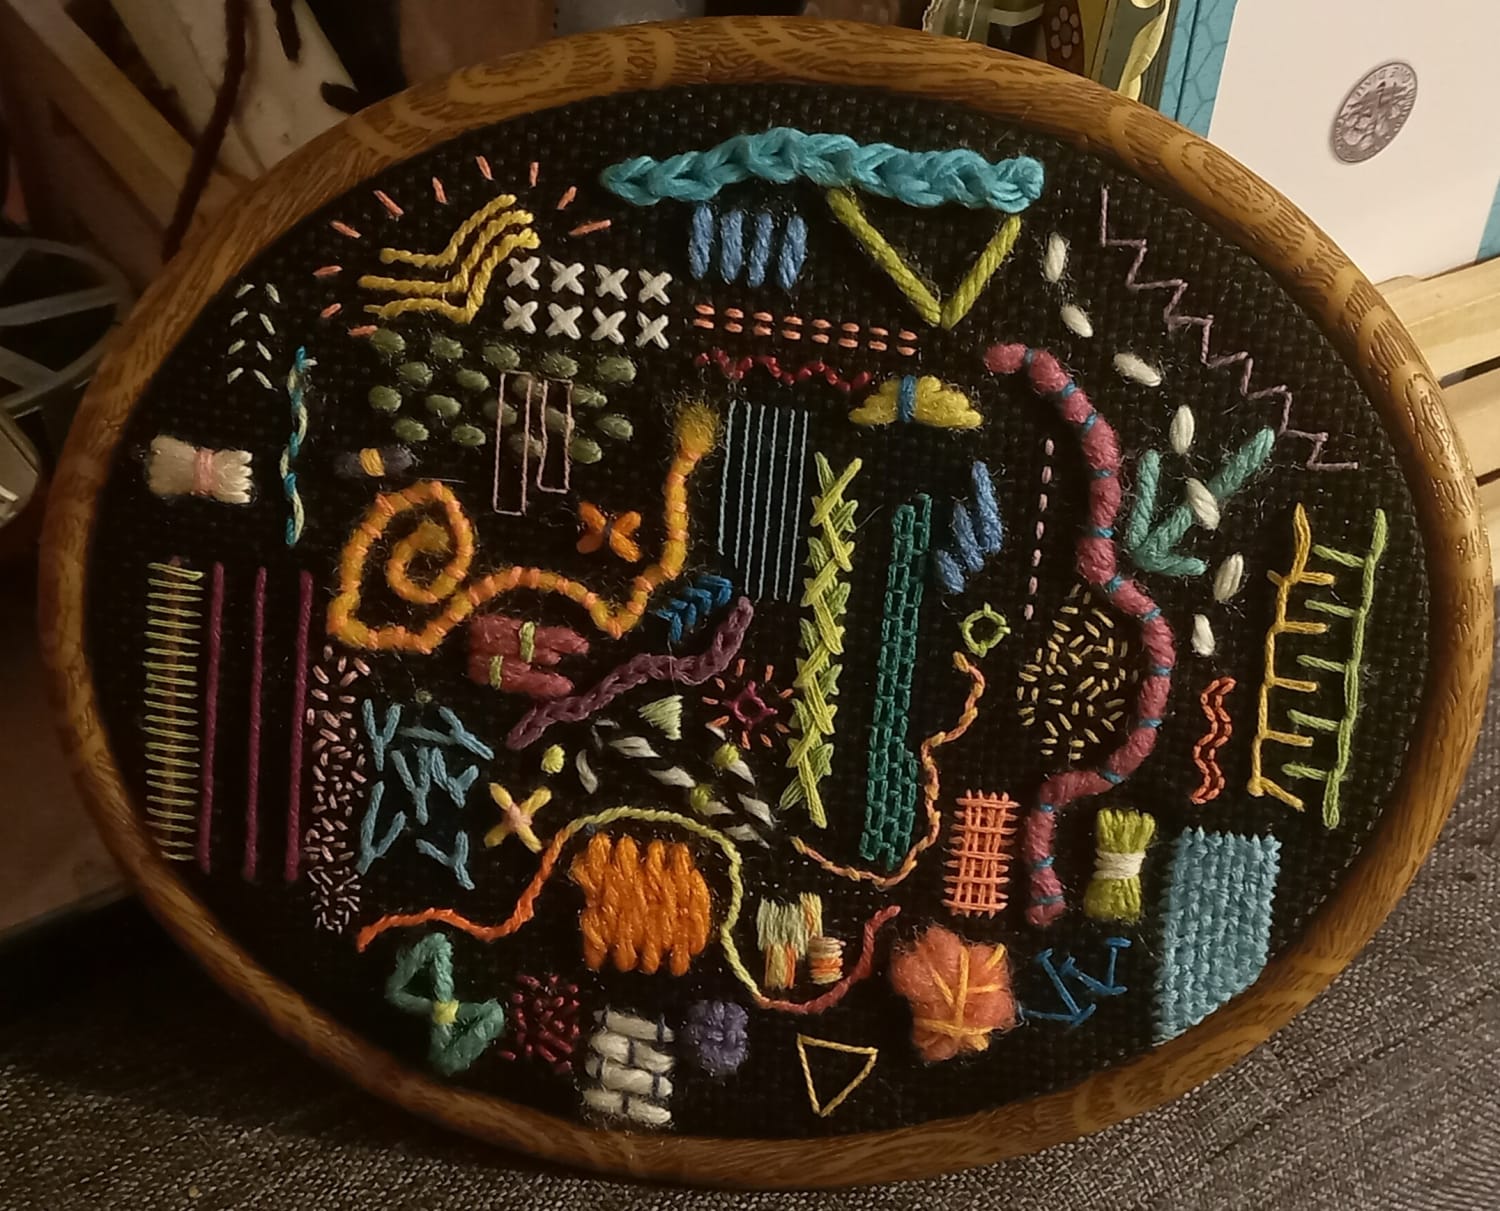 I make these colorful abstract embroideries and hang them everywhere